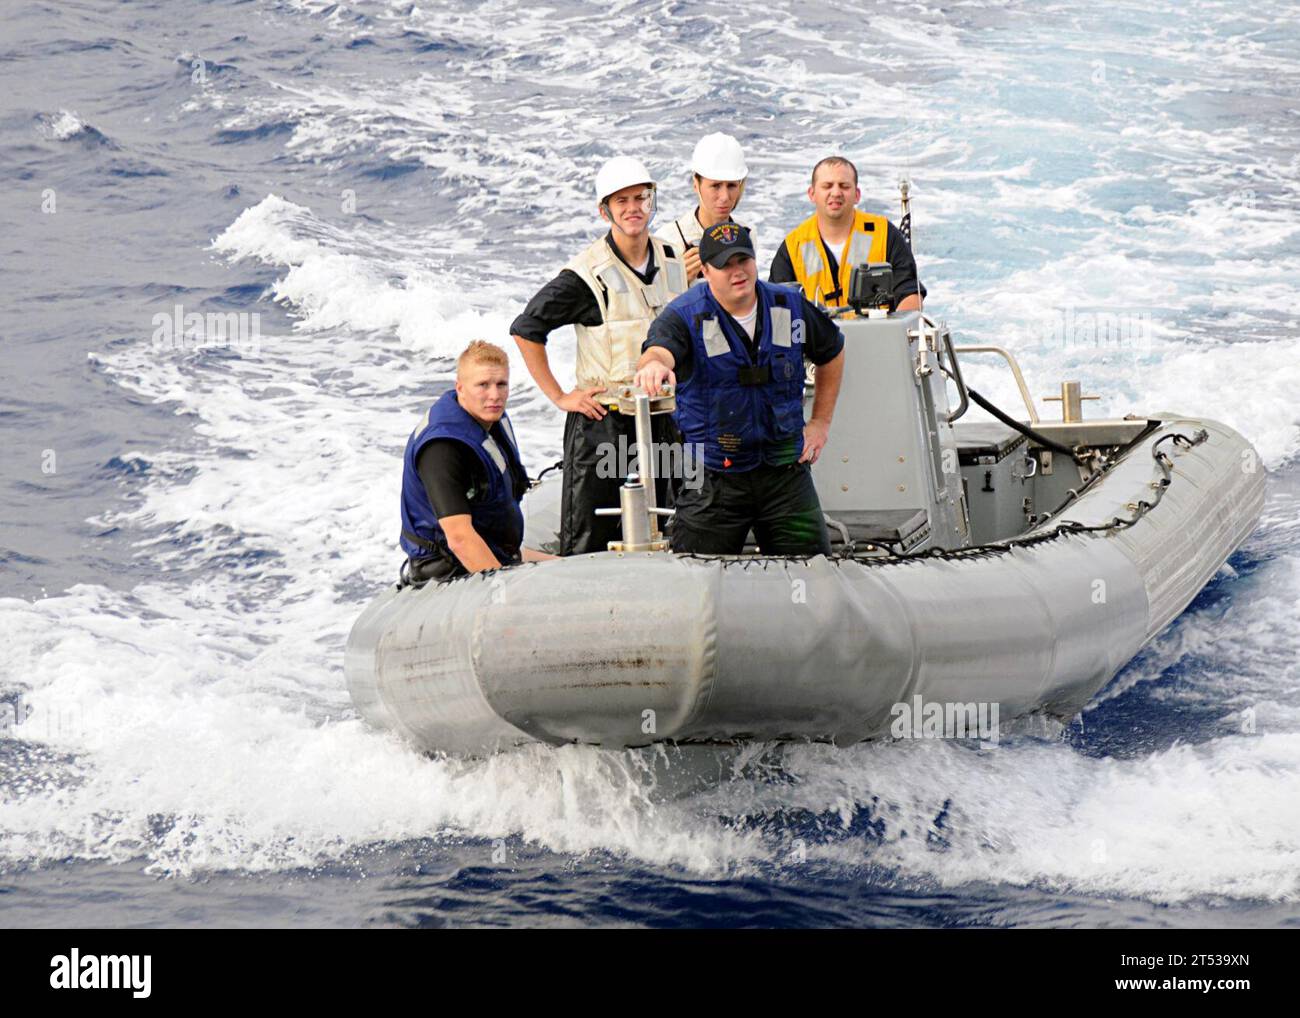 0807121082Z-003 ATLANTIC OCEAN (July 12, 2008) Sailors on a rigid hull inflatable boat participating in small boat operations return to the guided-missile destroyer USS Ramage (DDG 61) during the Iwo Jima Expeditionary Strike Group  composite unit training exercise (COMPTUEX). COMPTUEX provides a realistic training environment to ensure the strike group is capable and ready for its upcoming deployment. U.S. Navy Stock Photo